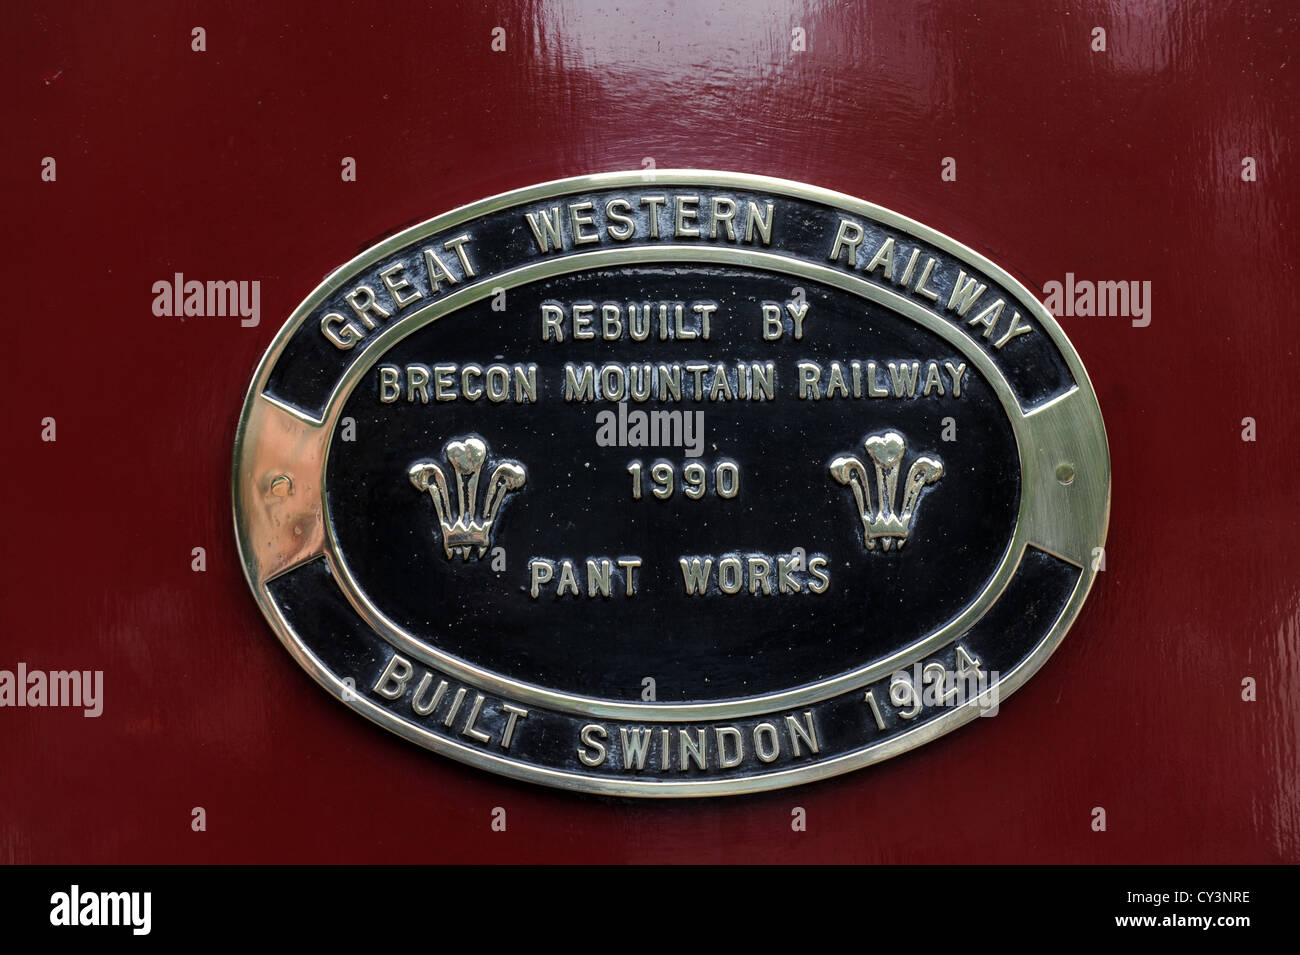 Brecon Mountain Railway plate on the Prince of Wales steam locomotive at Vale of Rheidol railway Wales Uk Stock Photo